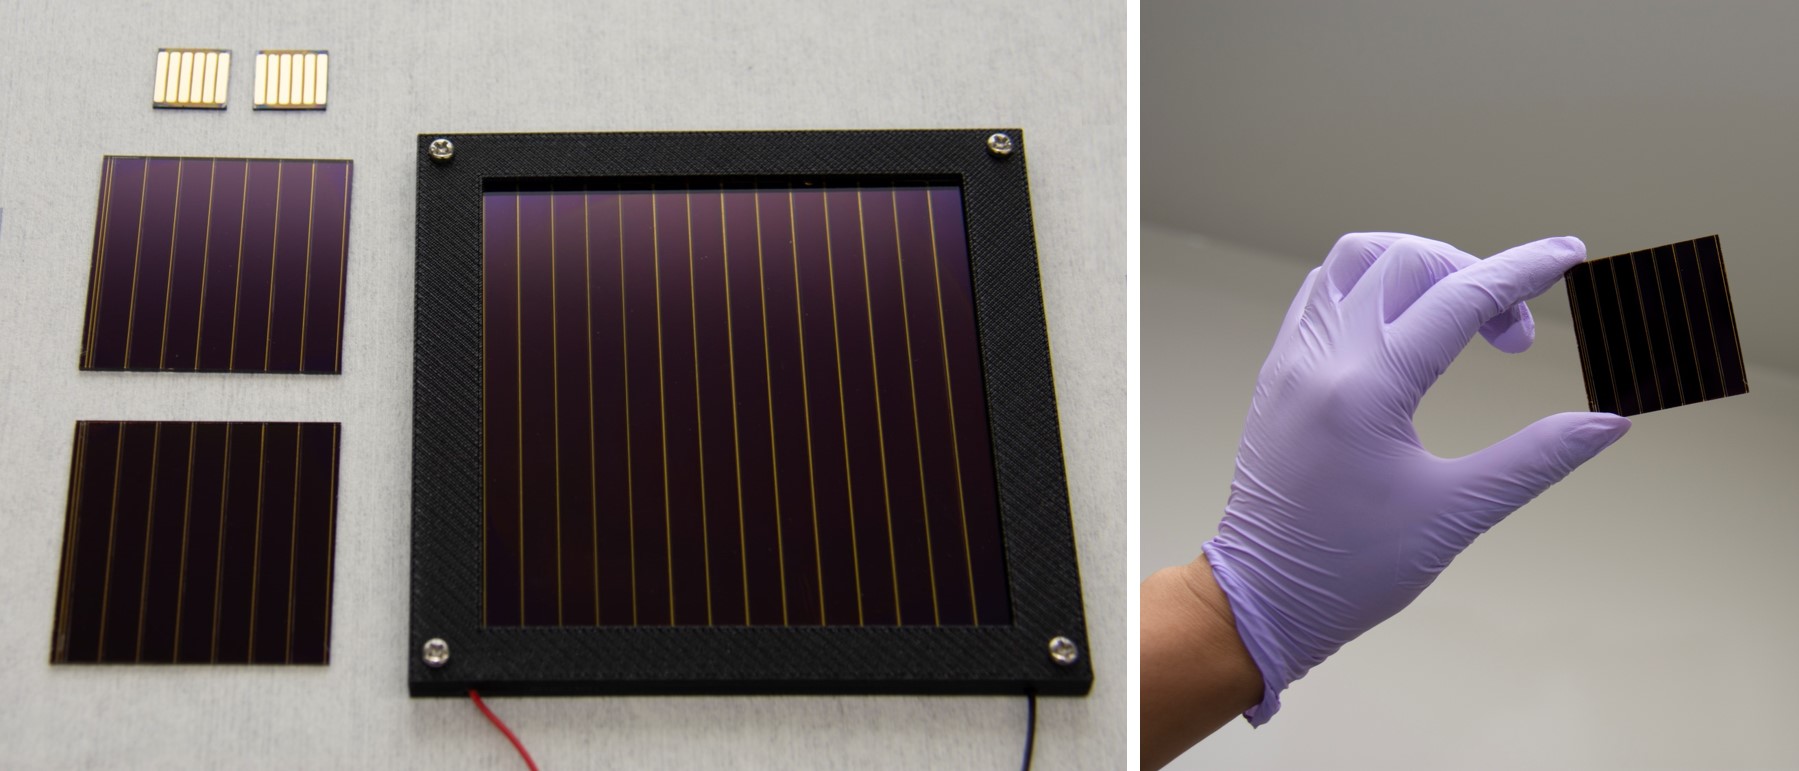 The OIST Energy Materials and Surface Sciences Unit works with solar cells and modules of varying size